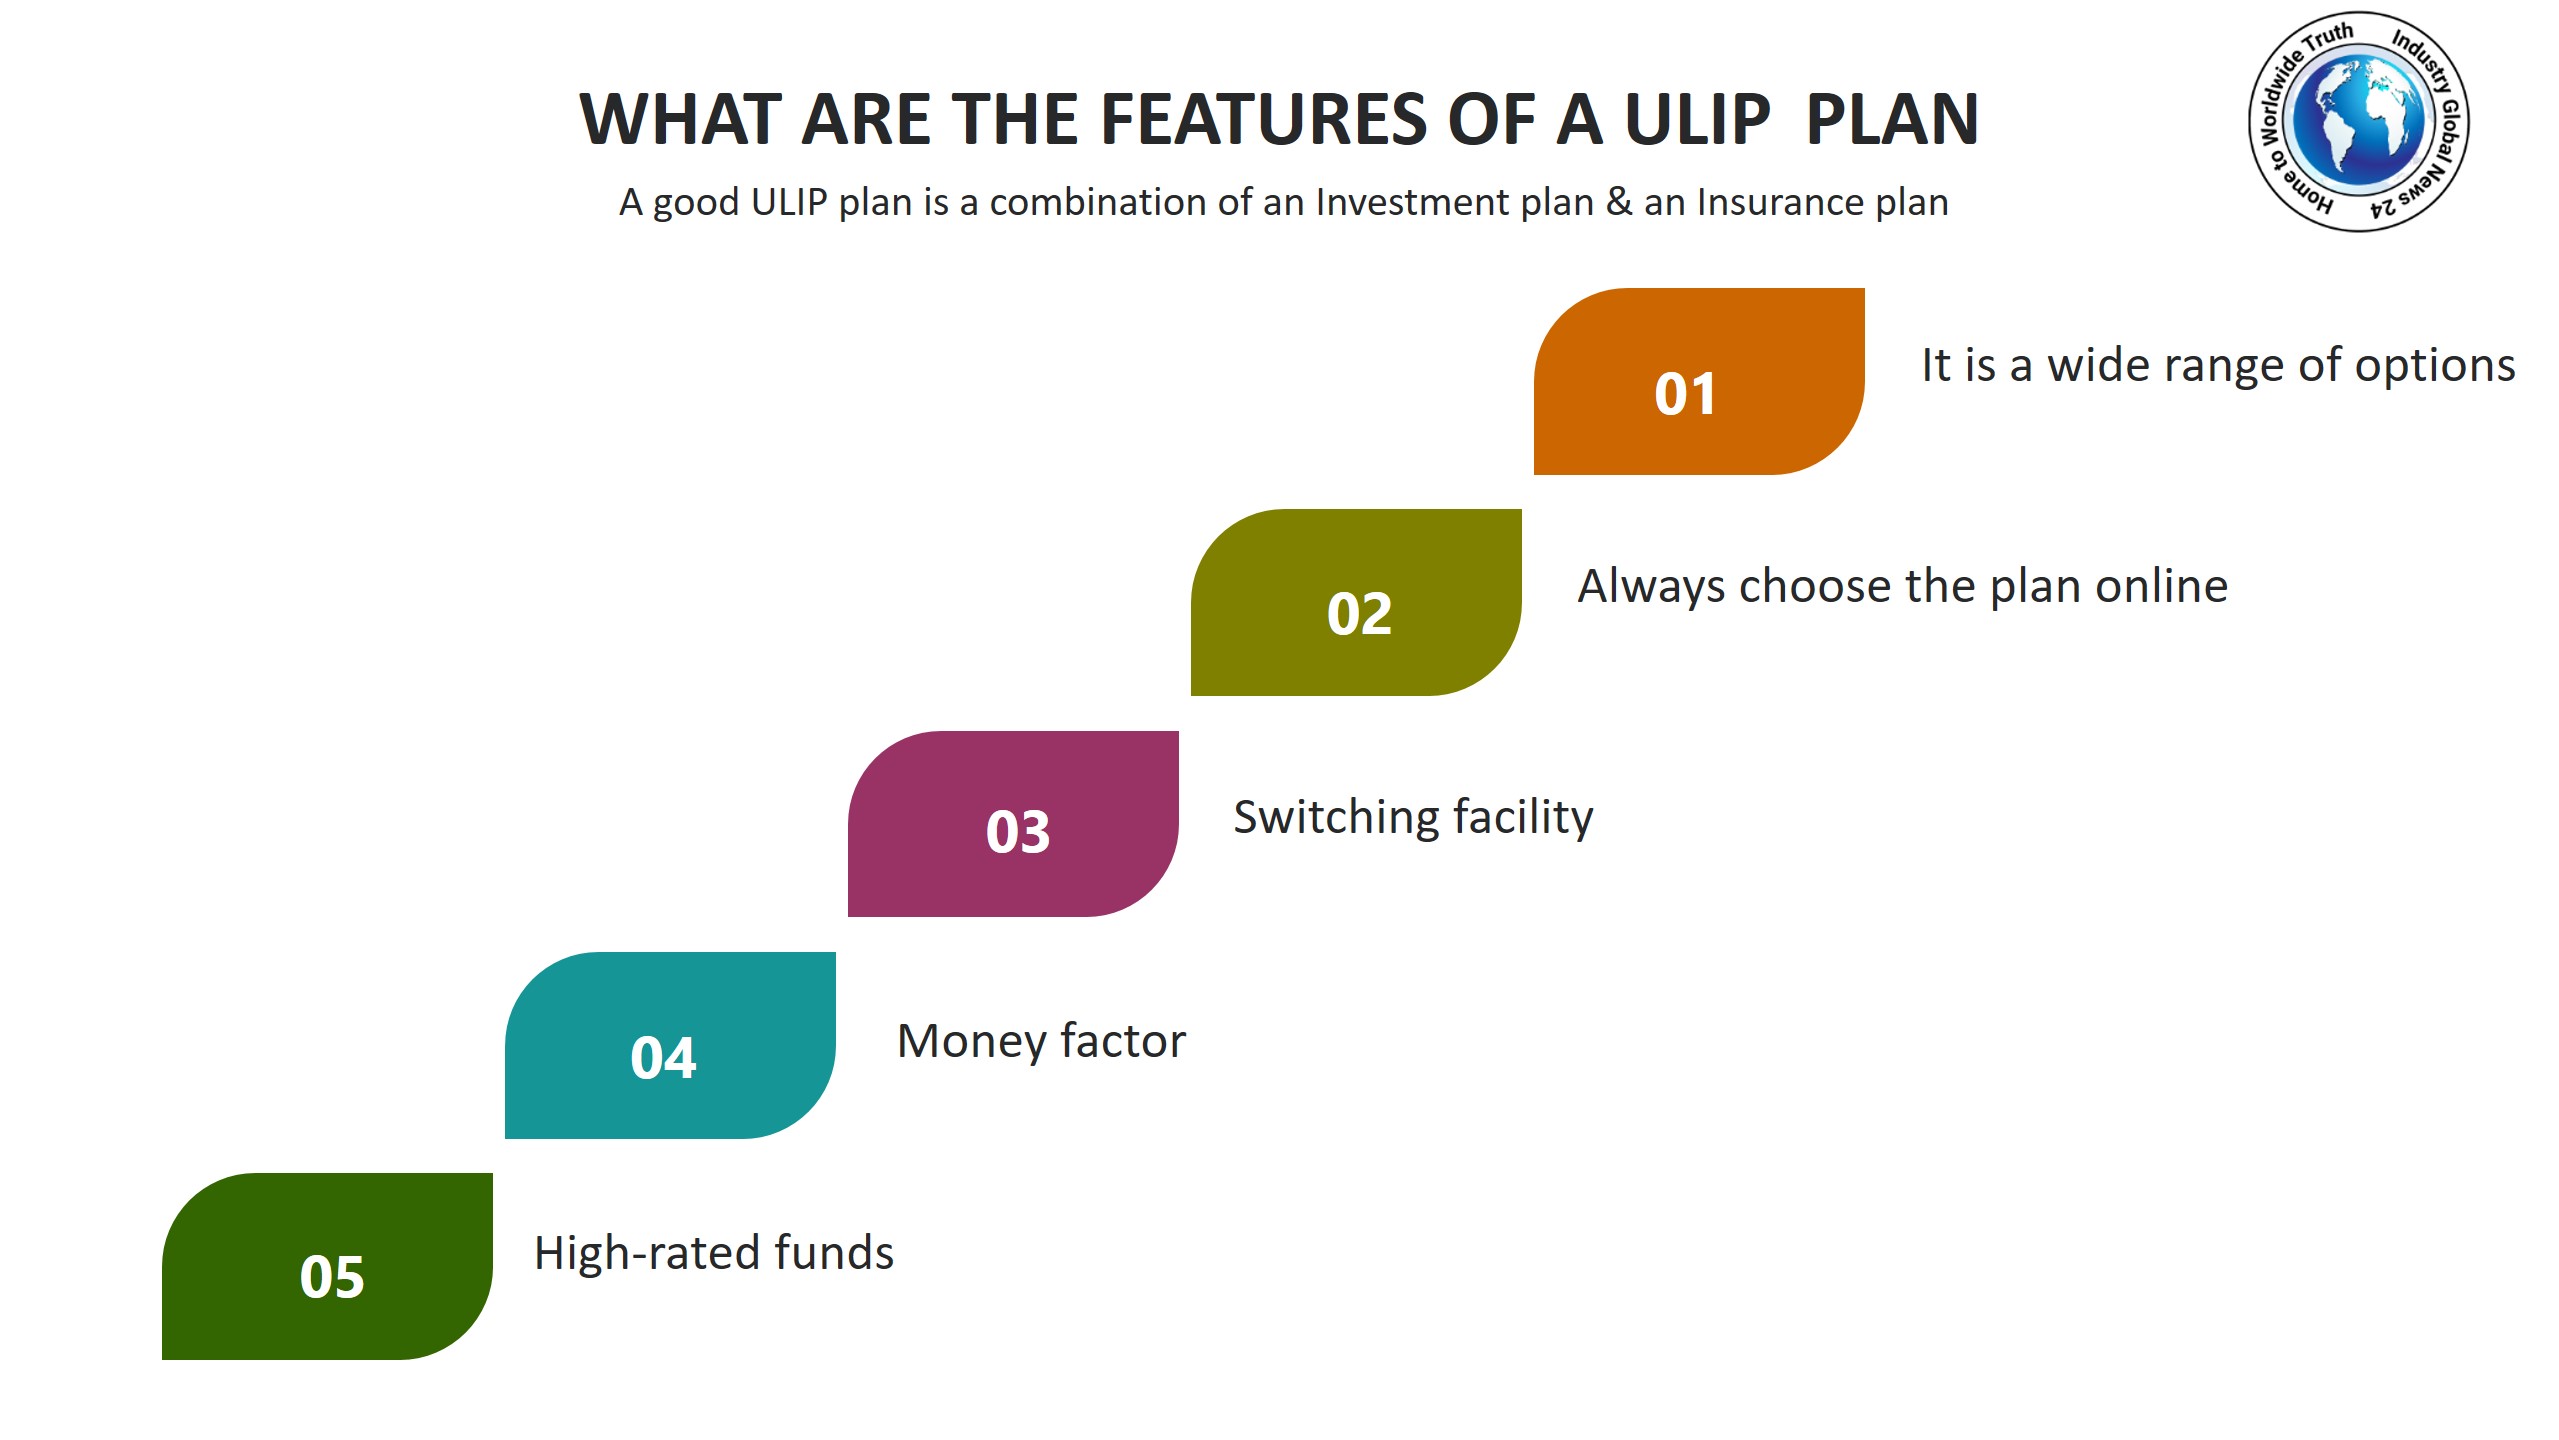 What are the features of a ULIP plan